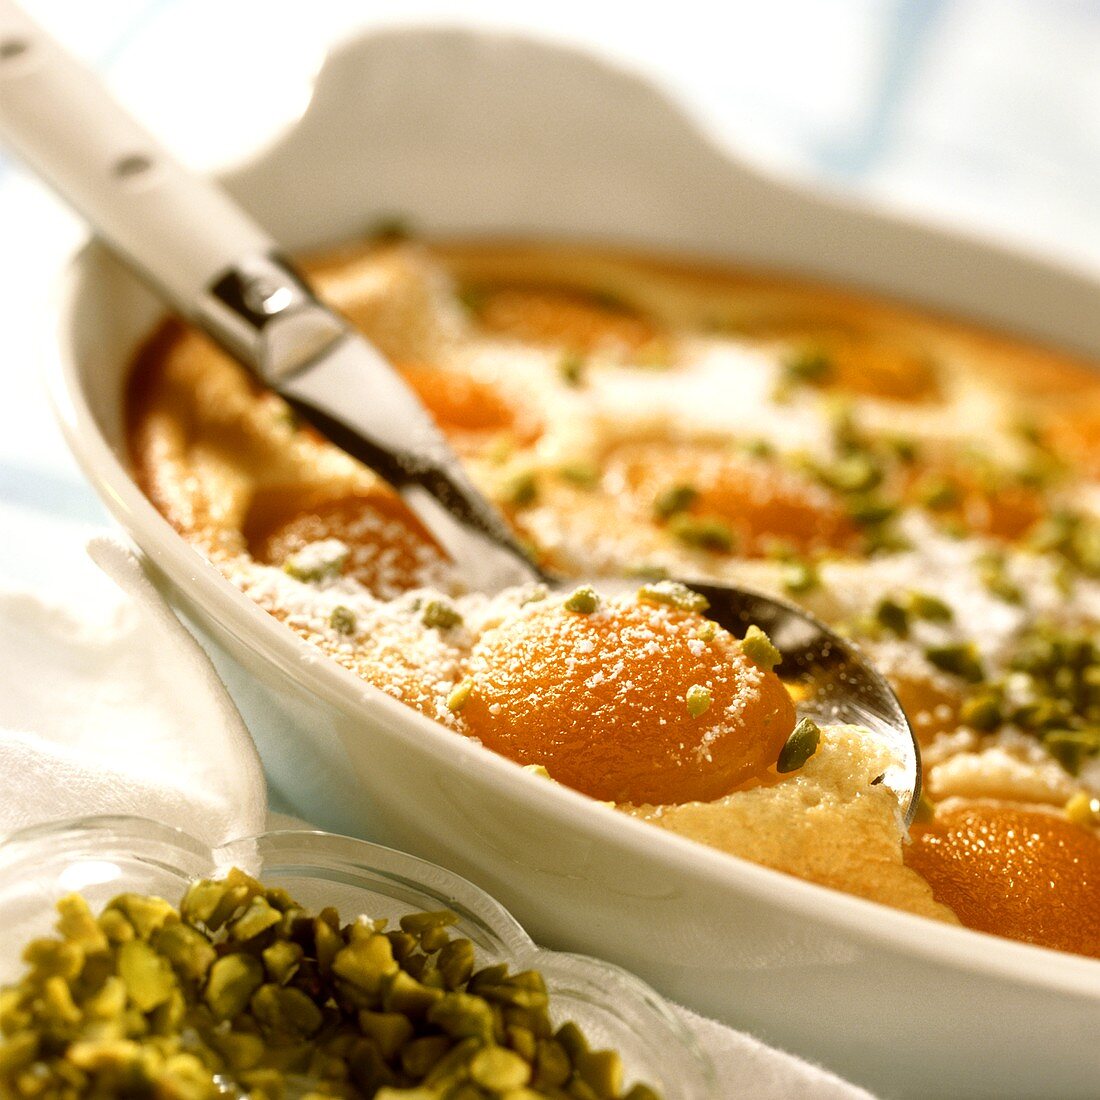 Apricot clafoutis with chopped pistachios